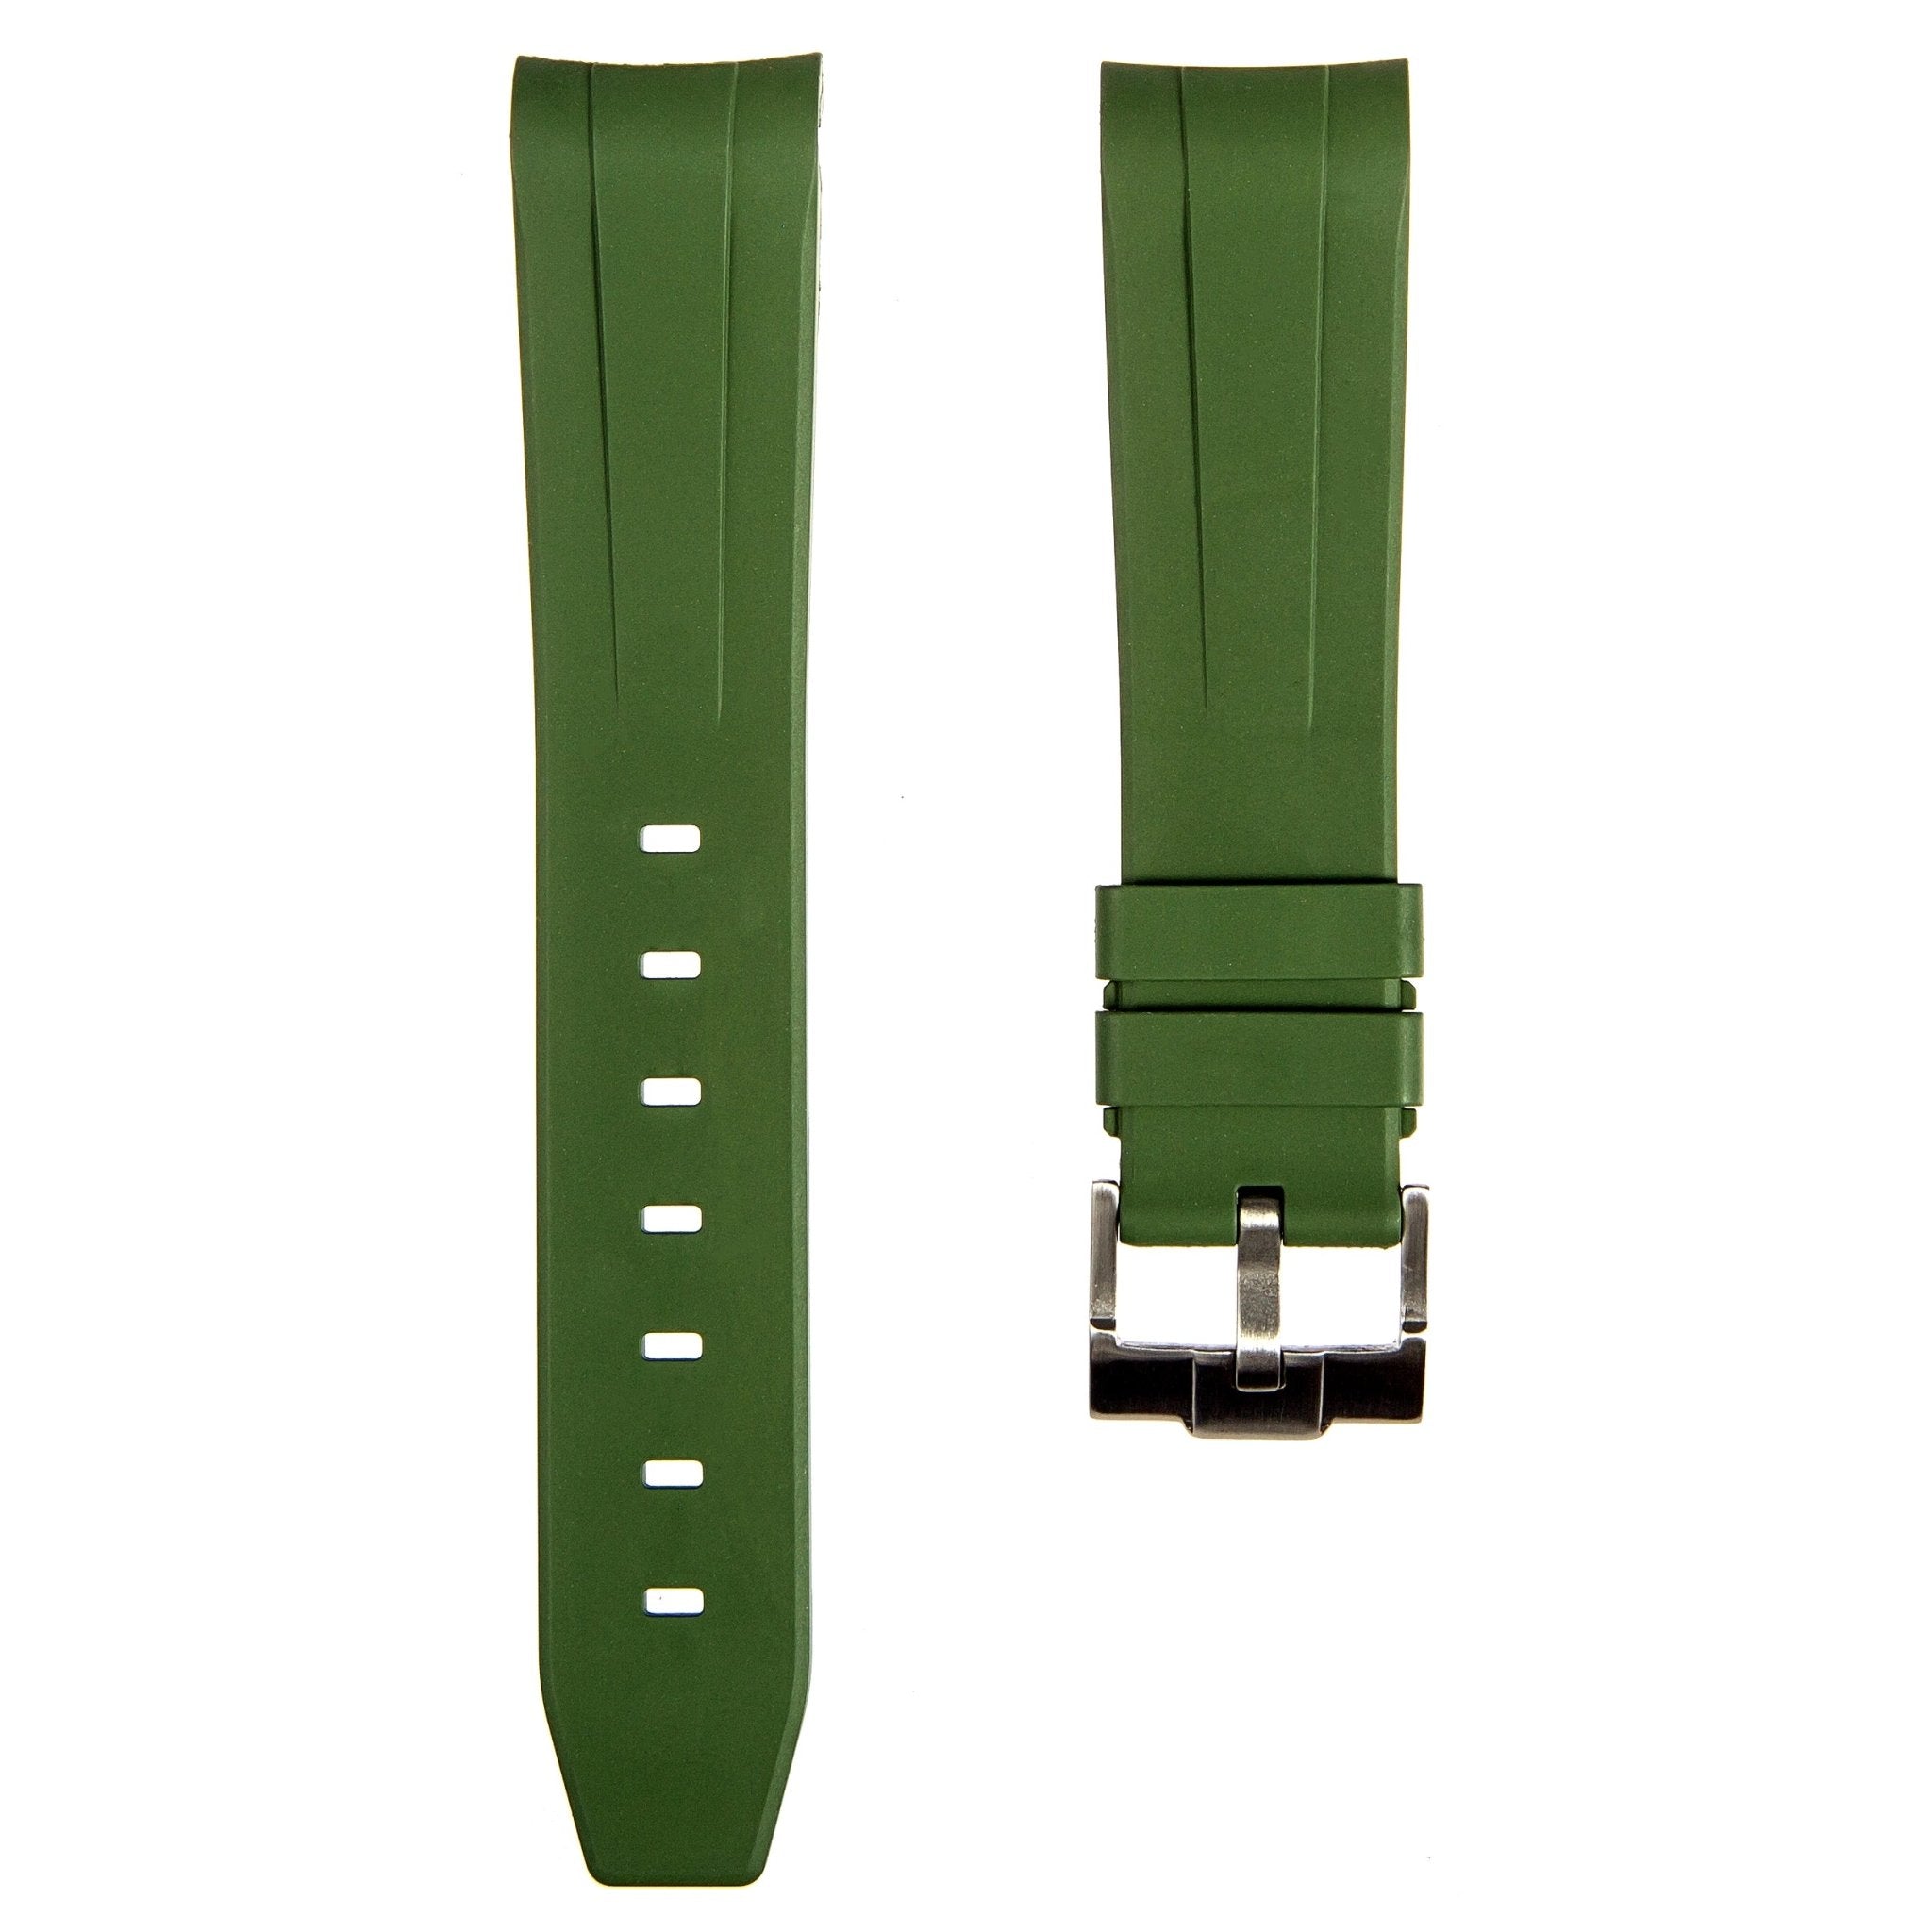 Forge Curved End FKM Rubber Strap – Compatible with Rolex Submariner – Army Green (2421) -Strapseeker